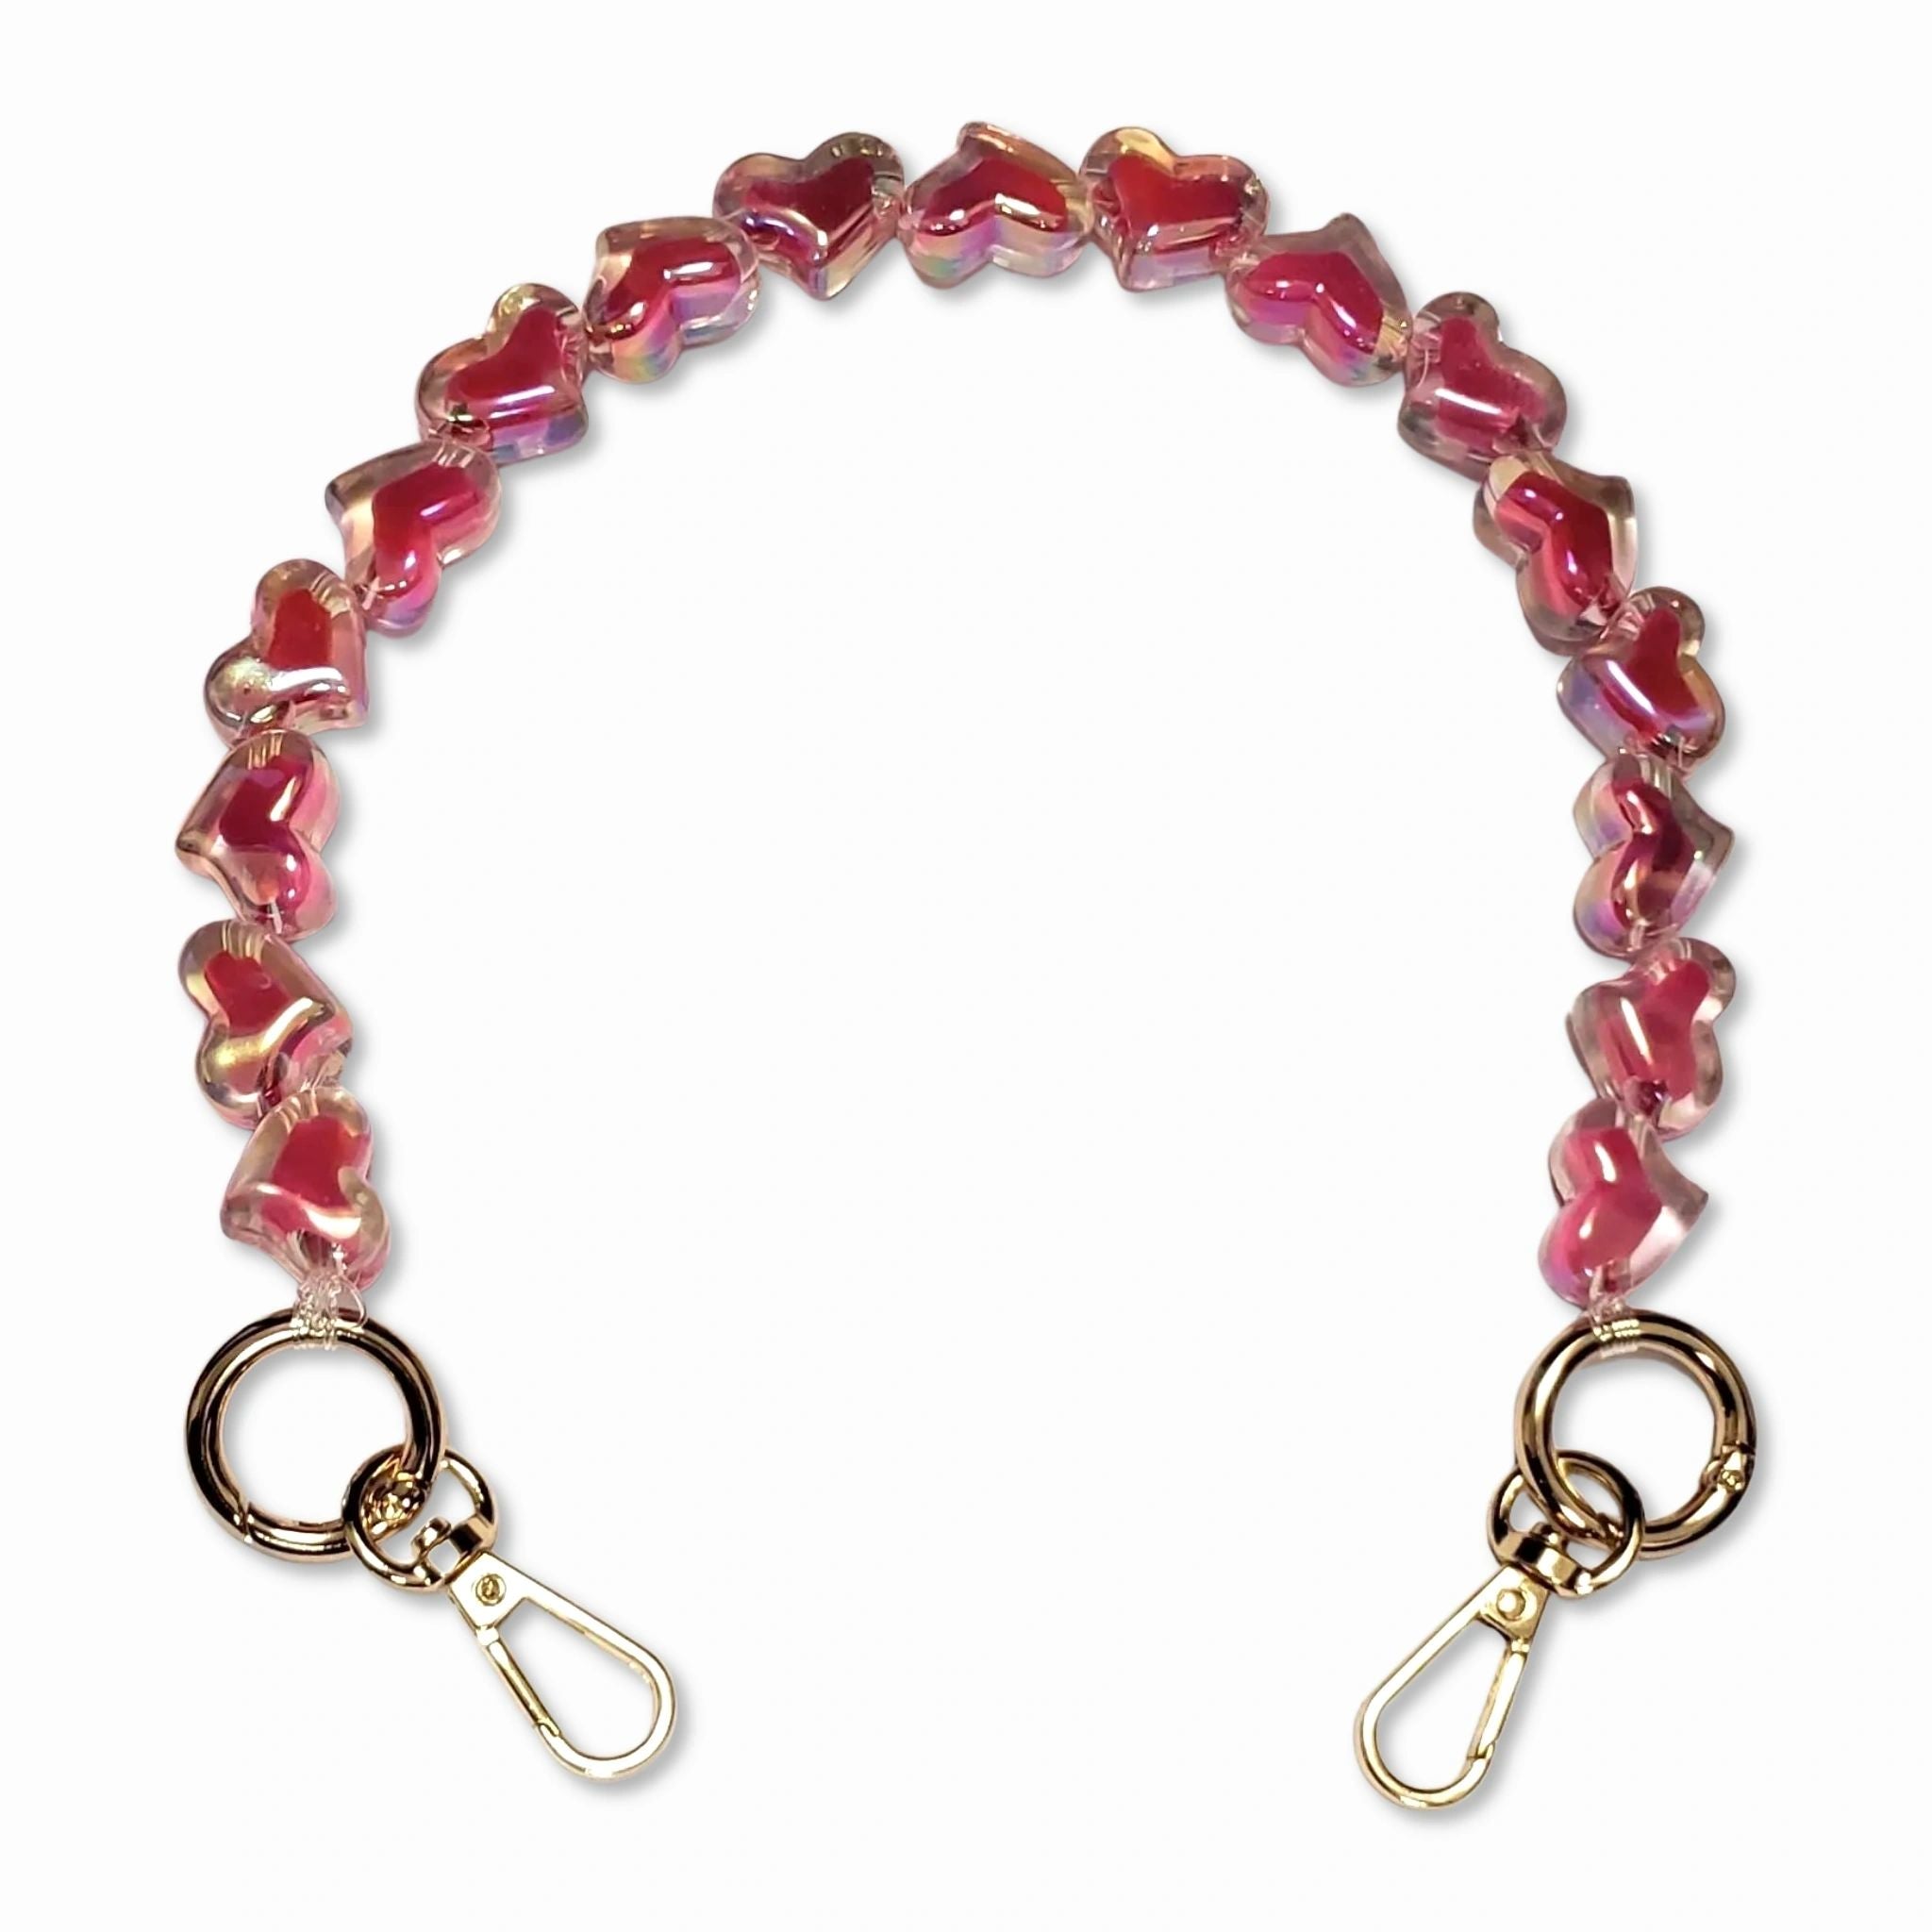 A short bead chain with golden carabiners and a glittery heart charm in deep pink color. The chain is designed to be attached to a phone case and can be worn around the wrist for a playful and eye-catching look. The chain is made by The American Case and is designed to be durable.